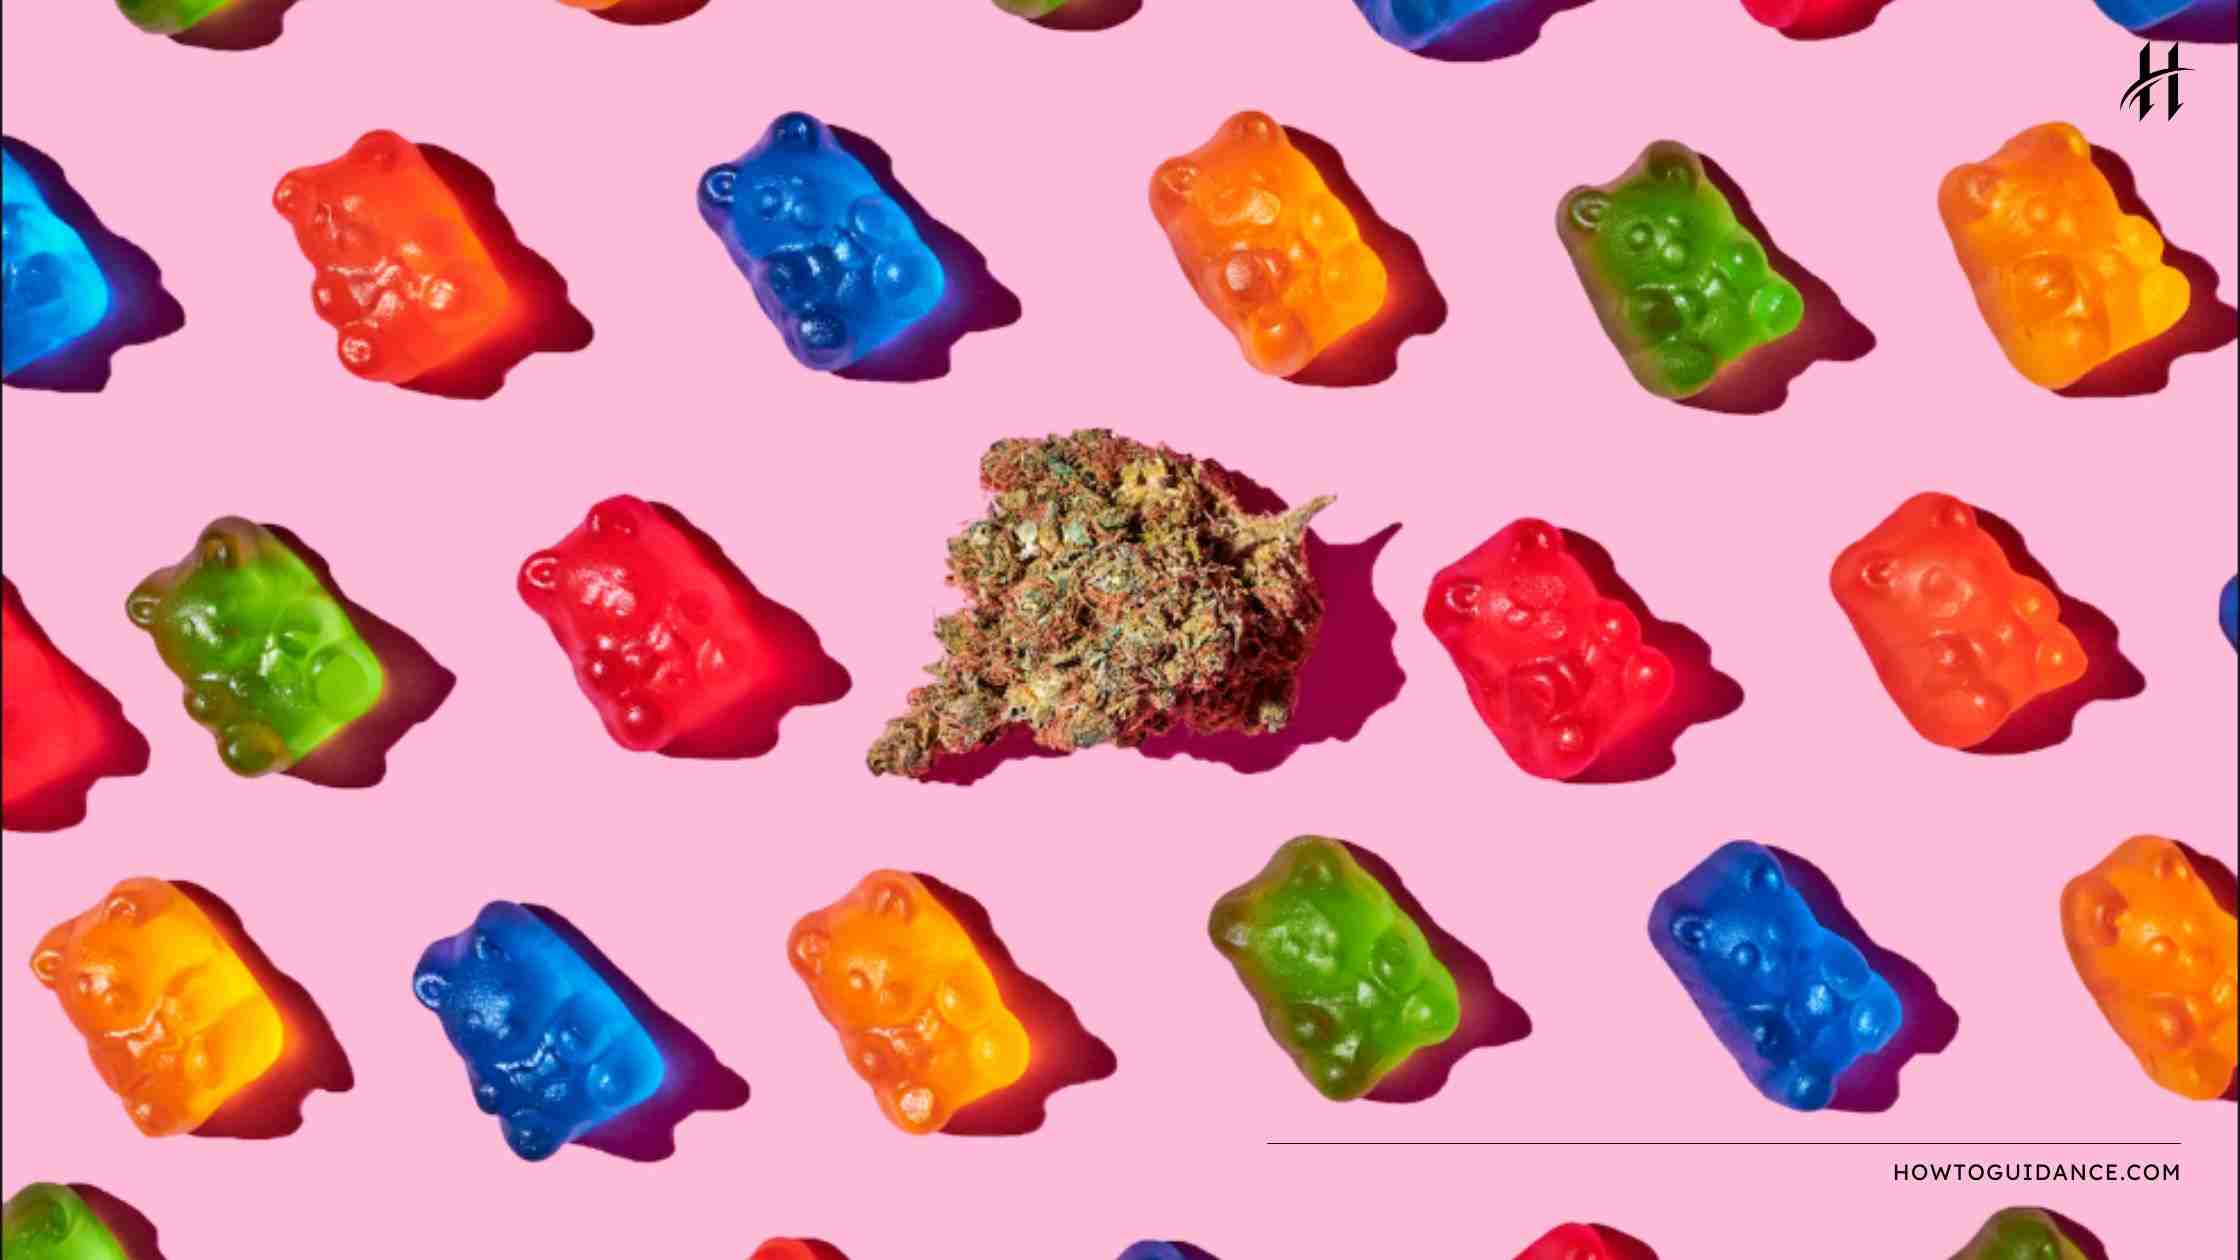 How To Recover From Edibles: Top 10 Things To Do?